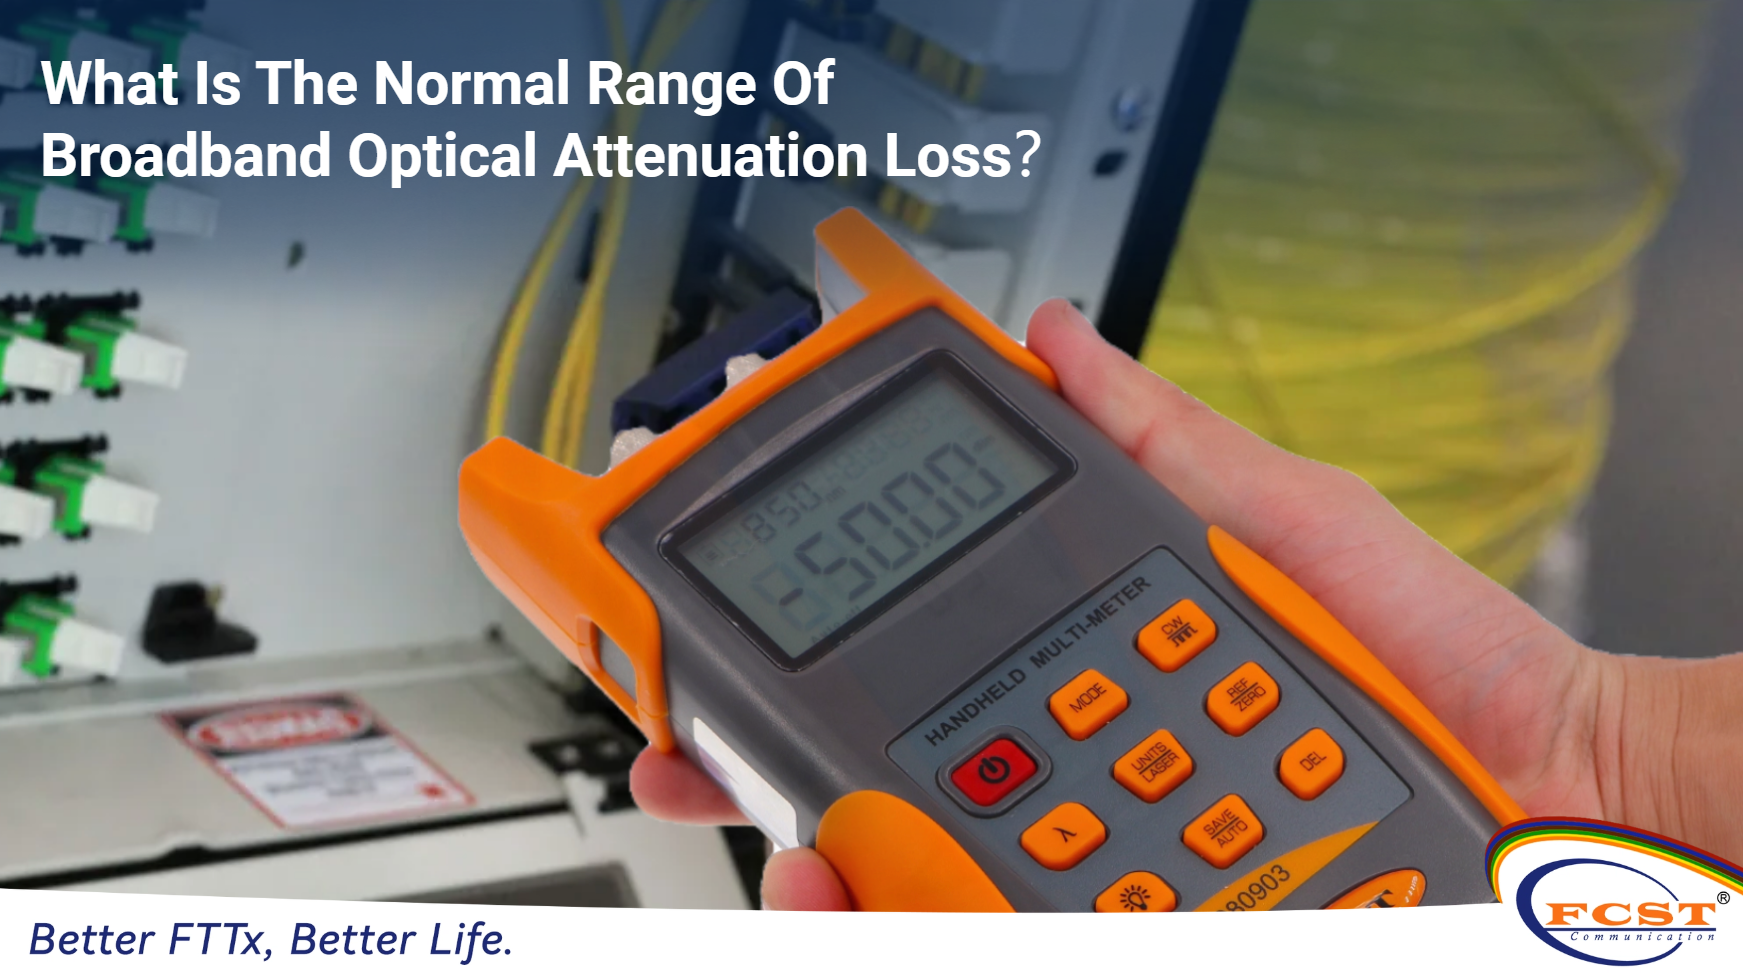 What Is The Normal Range Of Broadband Optical Attenuation Loss?